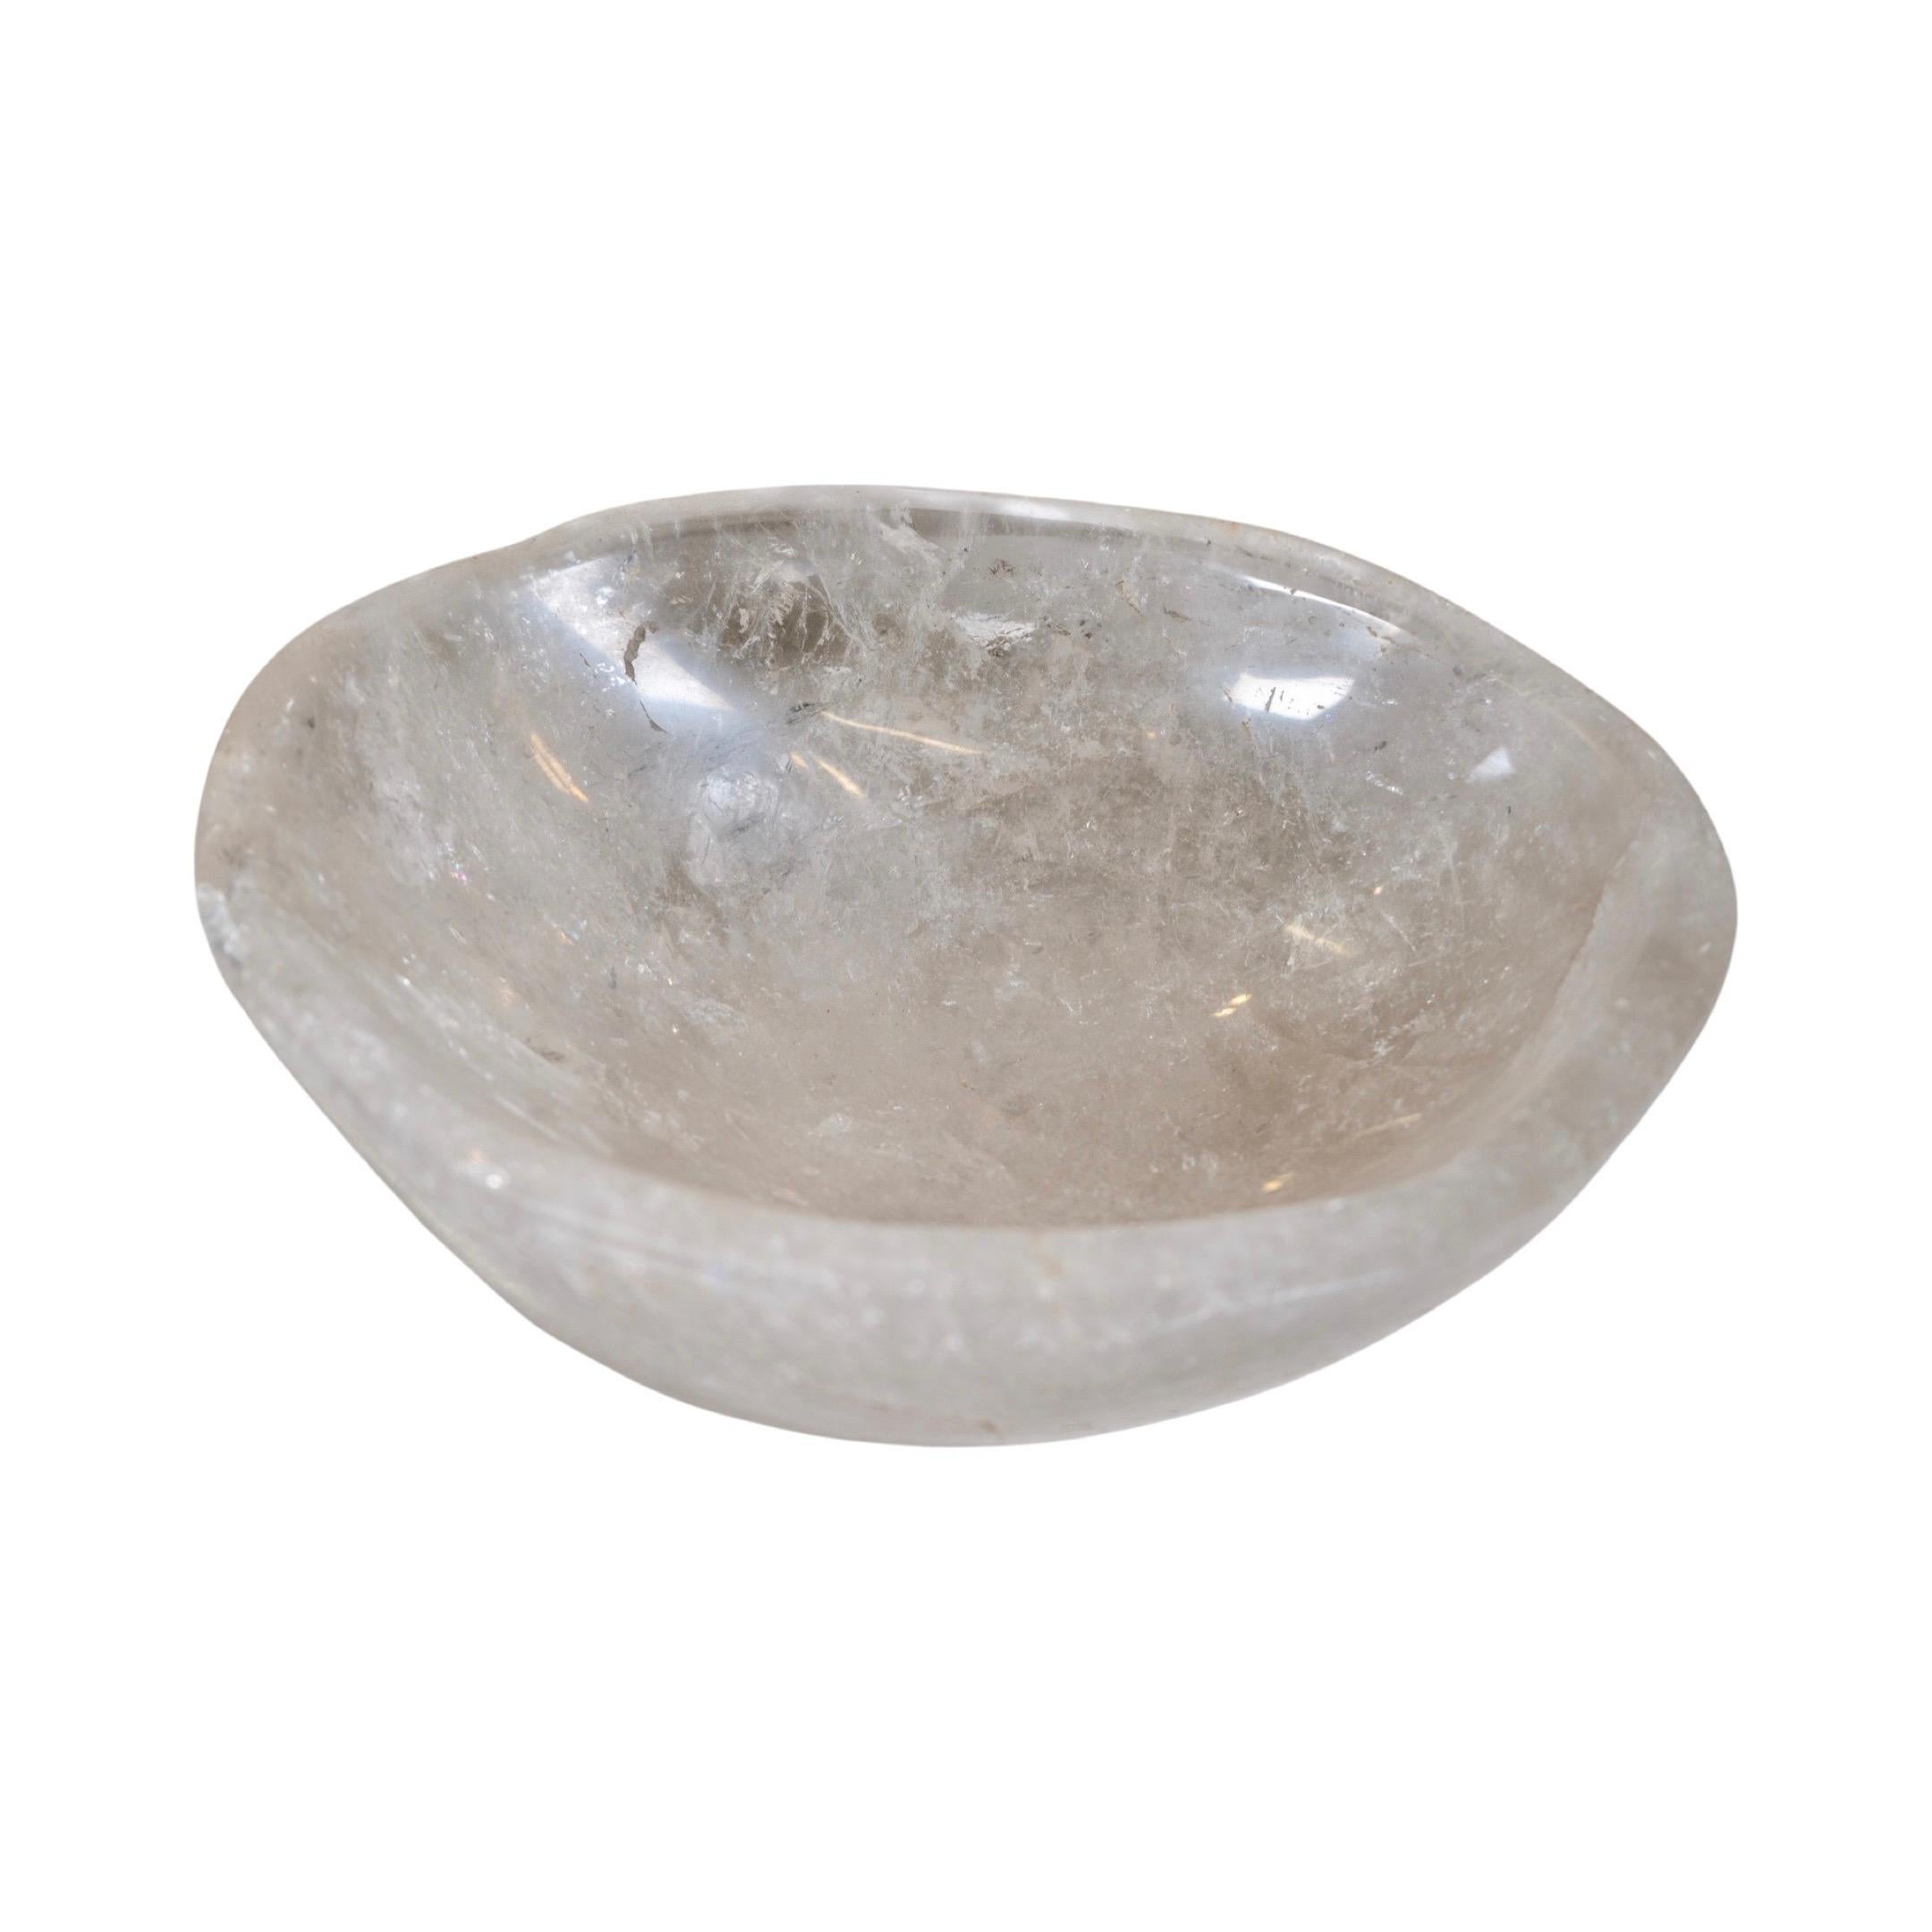 This polished Brazilian Rock crystal sink bowl, crafted in 2010, adds sophistication to any bathroom. Providing an elegant focus, it offers both aesthetic value and increased longevity. Enjoy luxurious crystal features in your bathroom with this